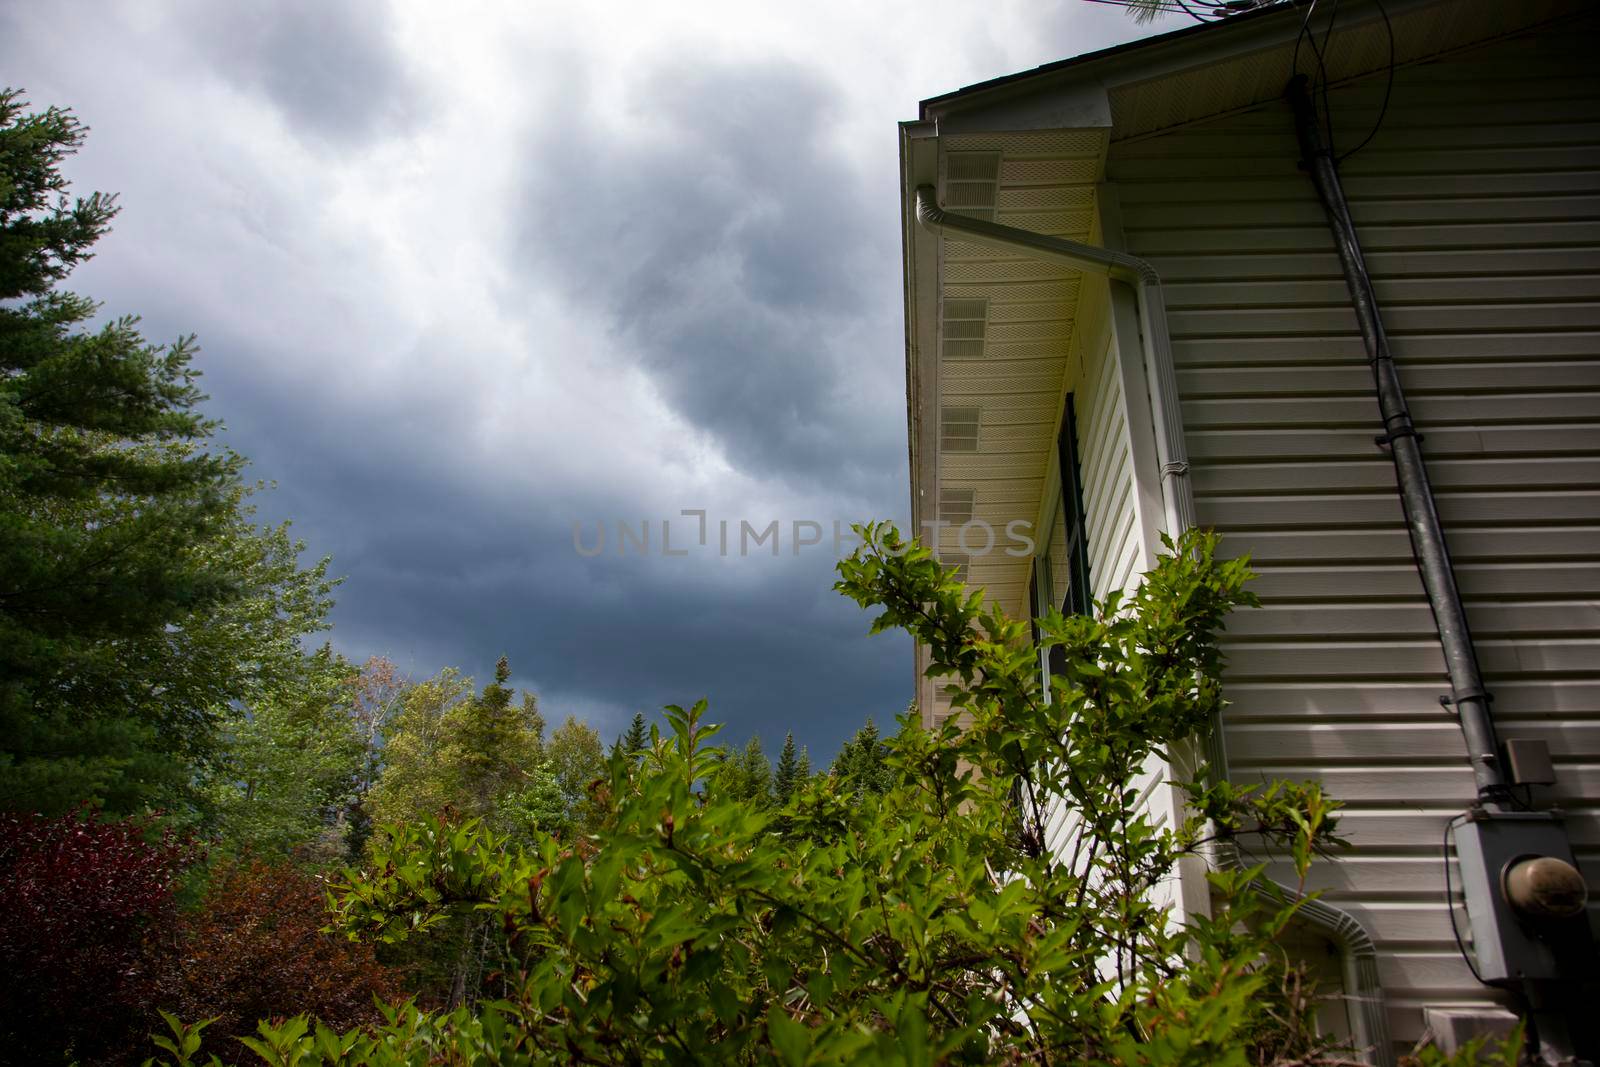 storm brewing above house  by rustycanuck